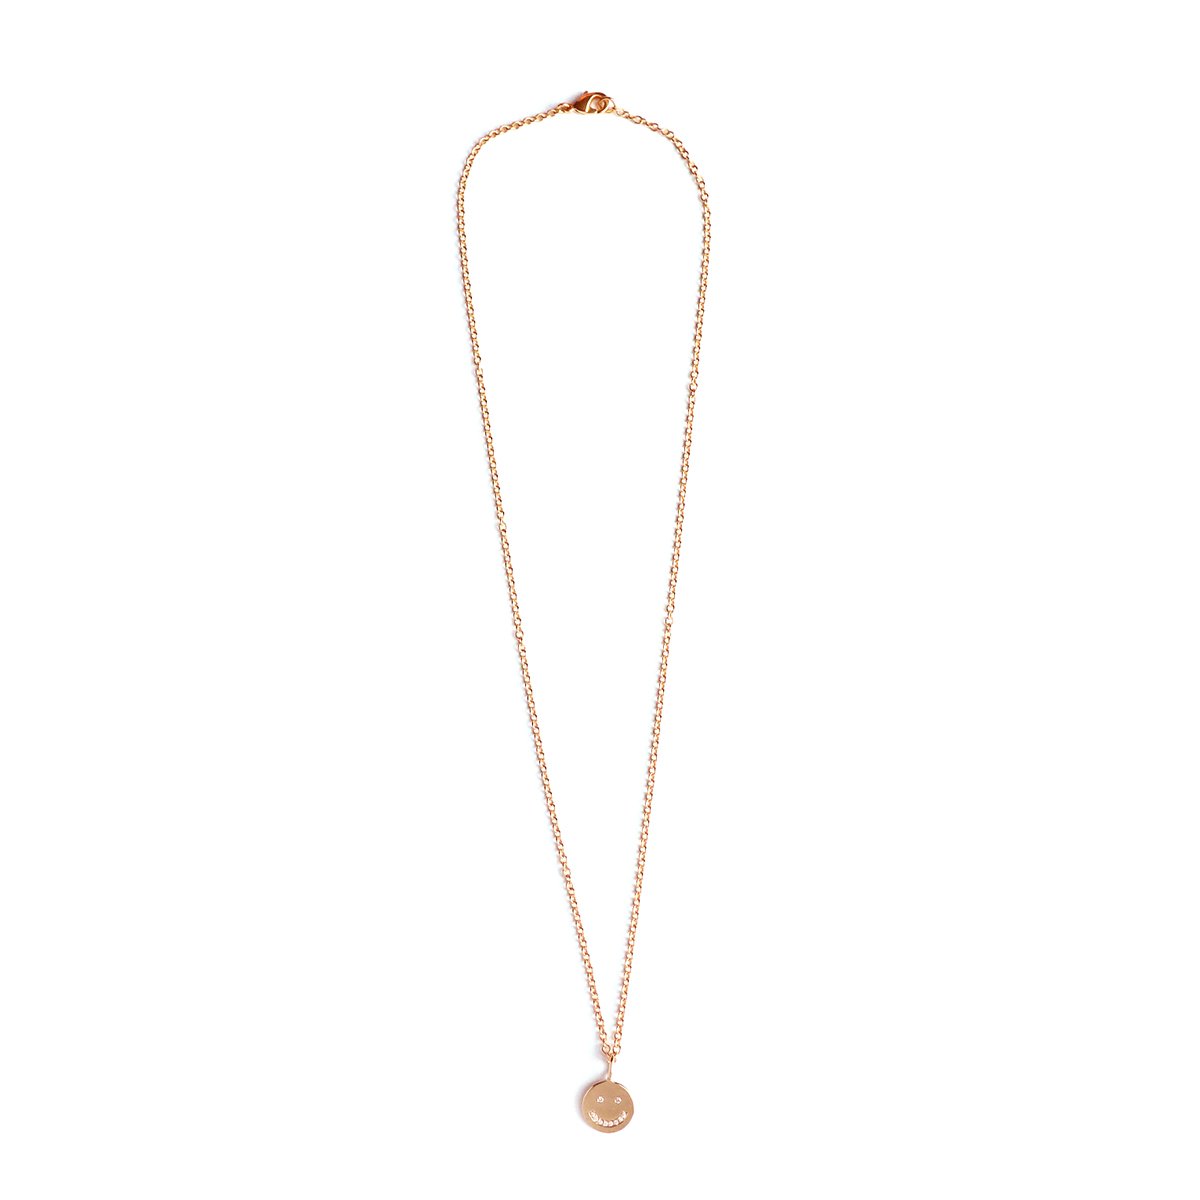 Smiling Face Necklace (Rose Gold) - Chainless Brain